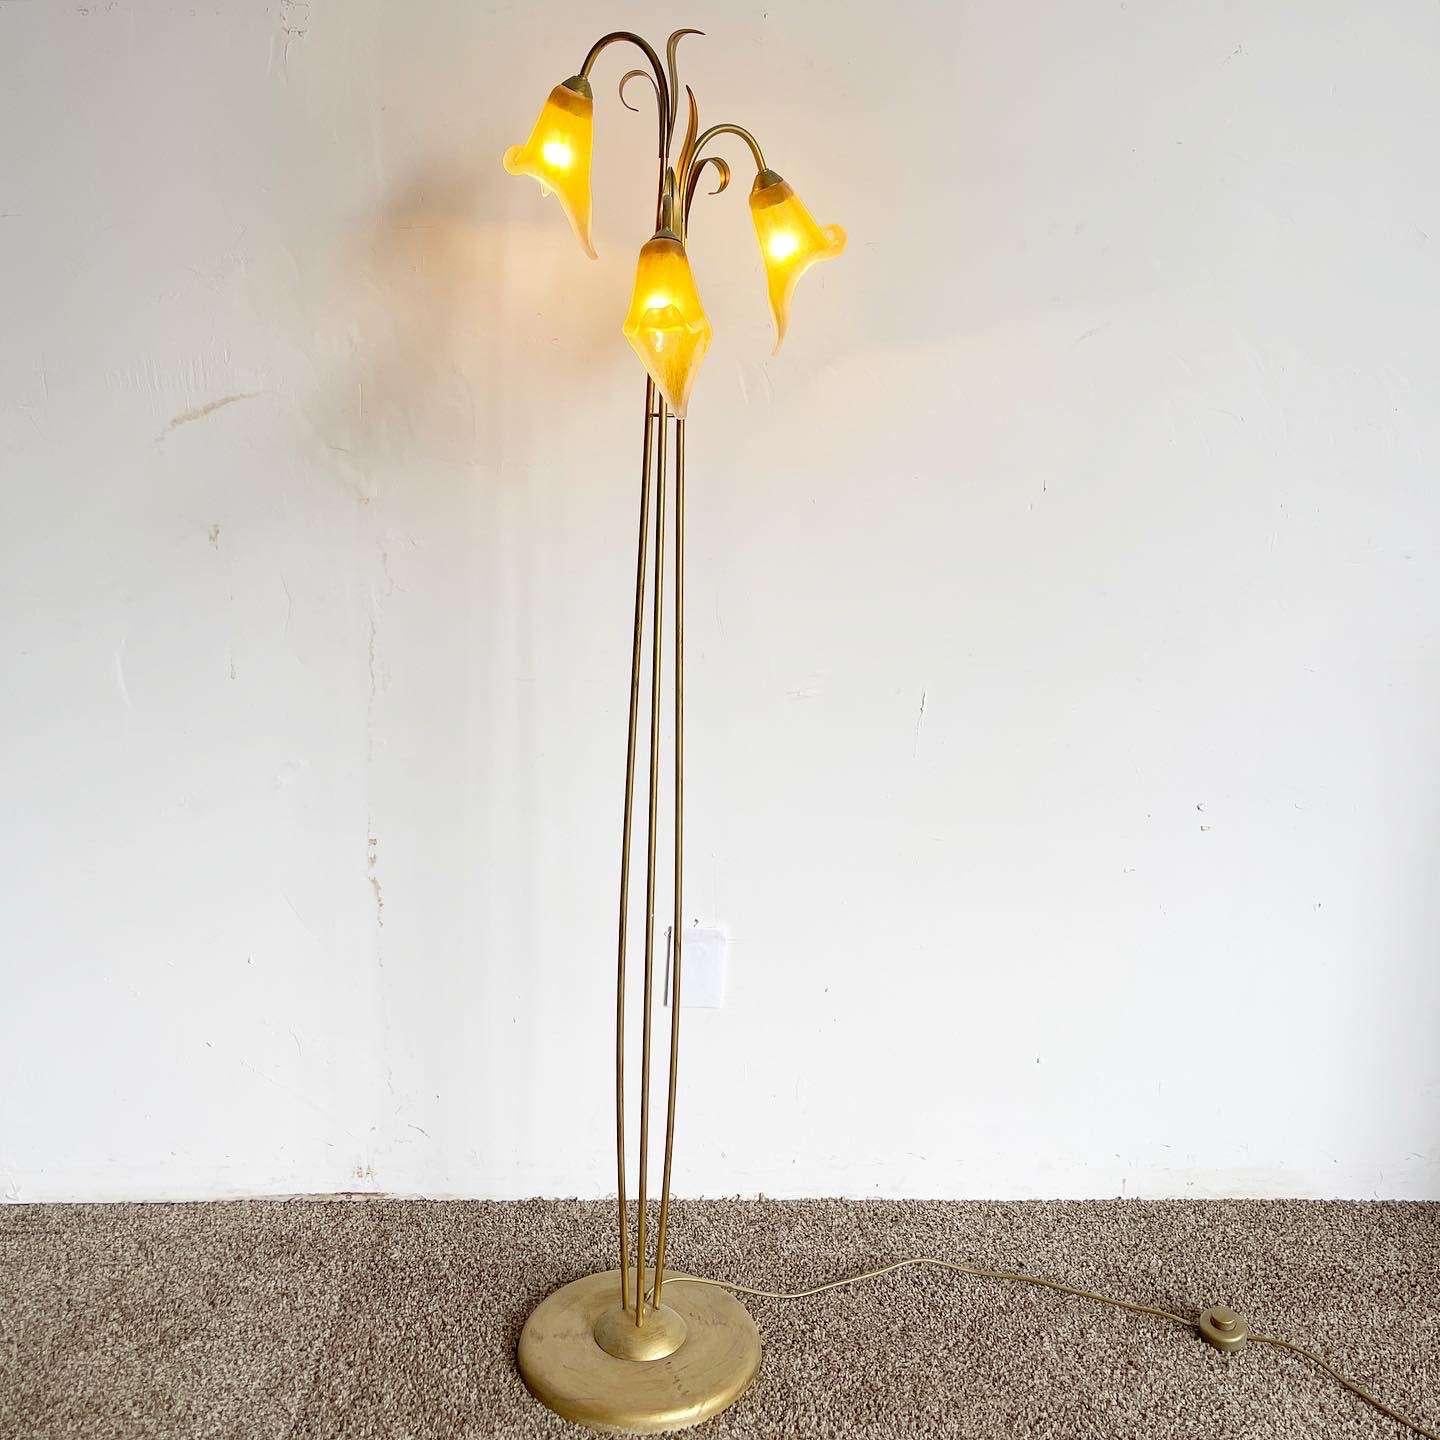 Incredible vintage regency metal and glass floor lamp. Features three glass tulip lamp shades on three gold stems.